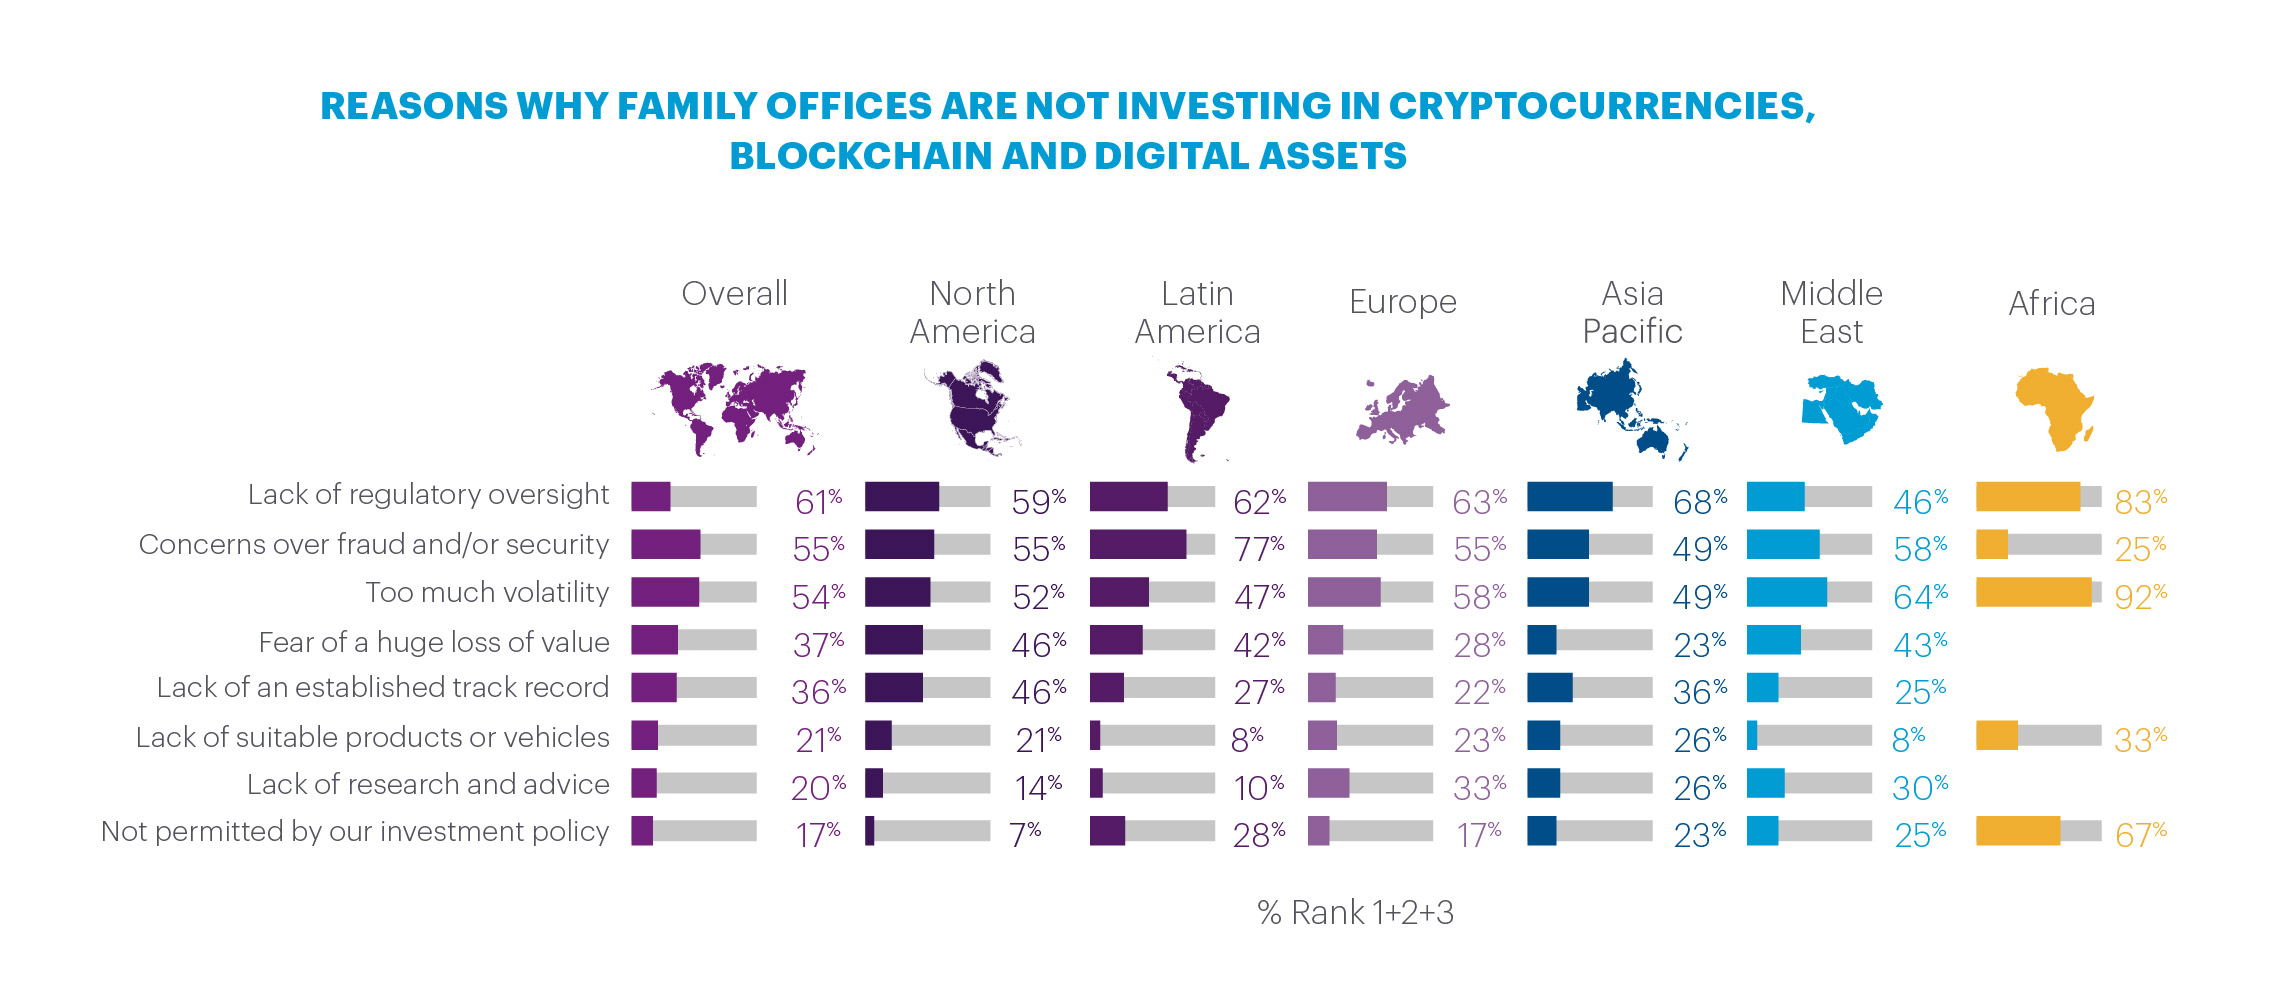 Regional percentages on why family offices are not investing in cryptocurrencies, blockchain, and digital assets